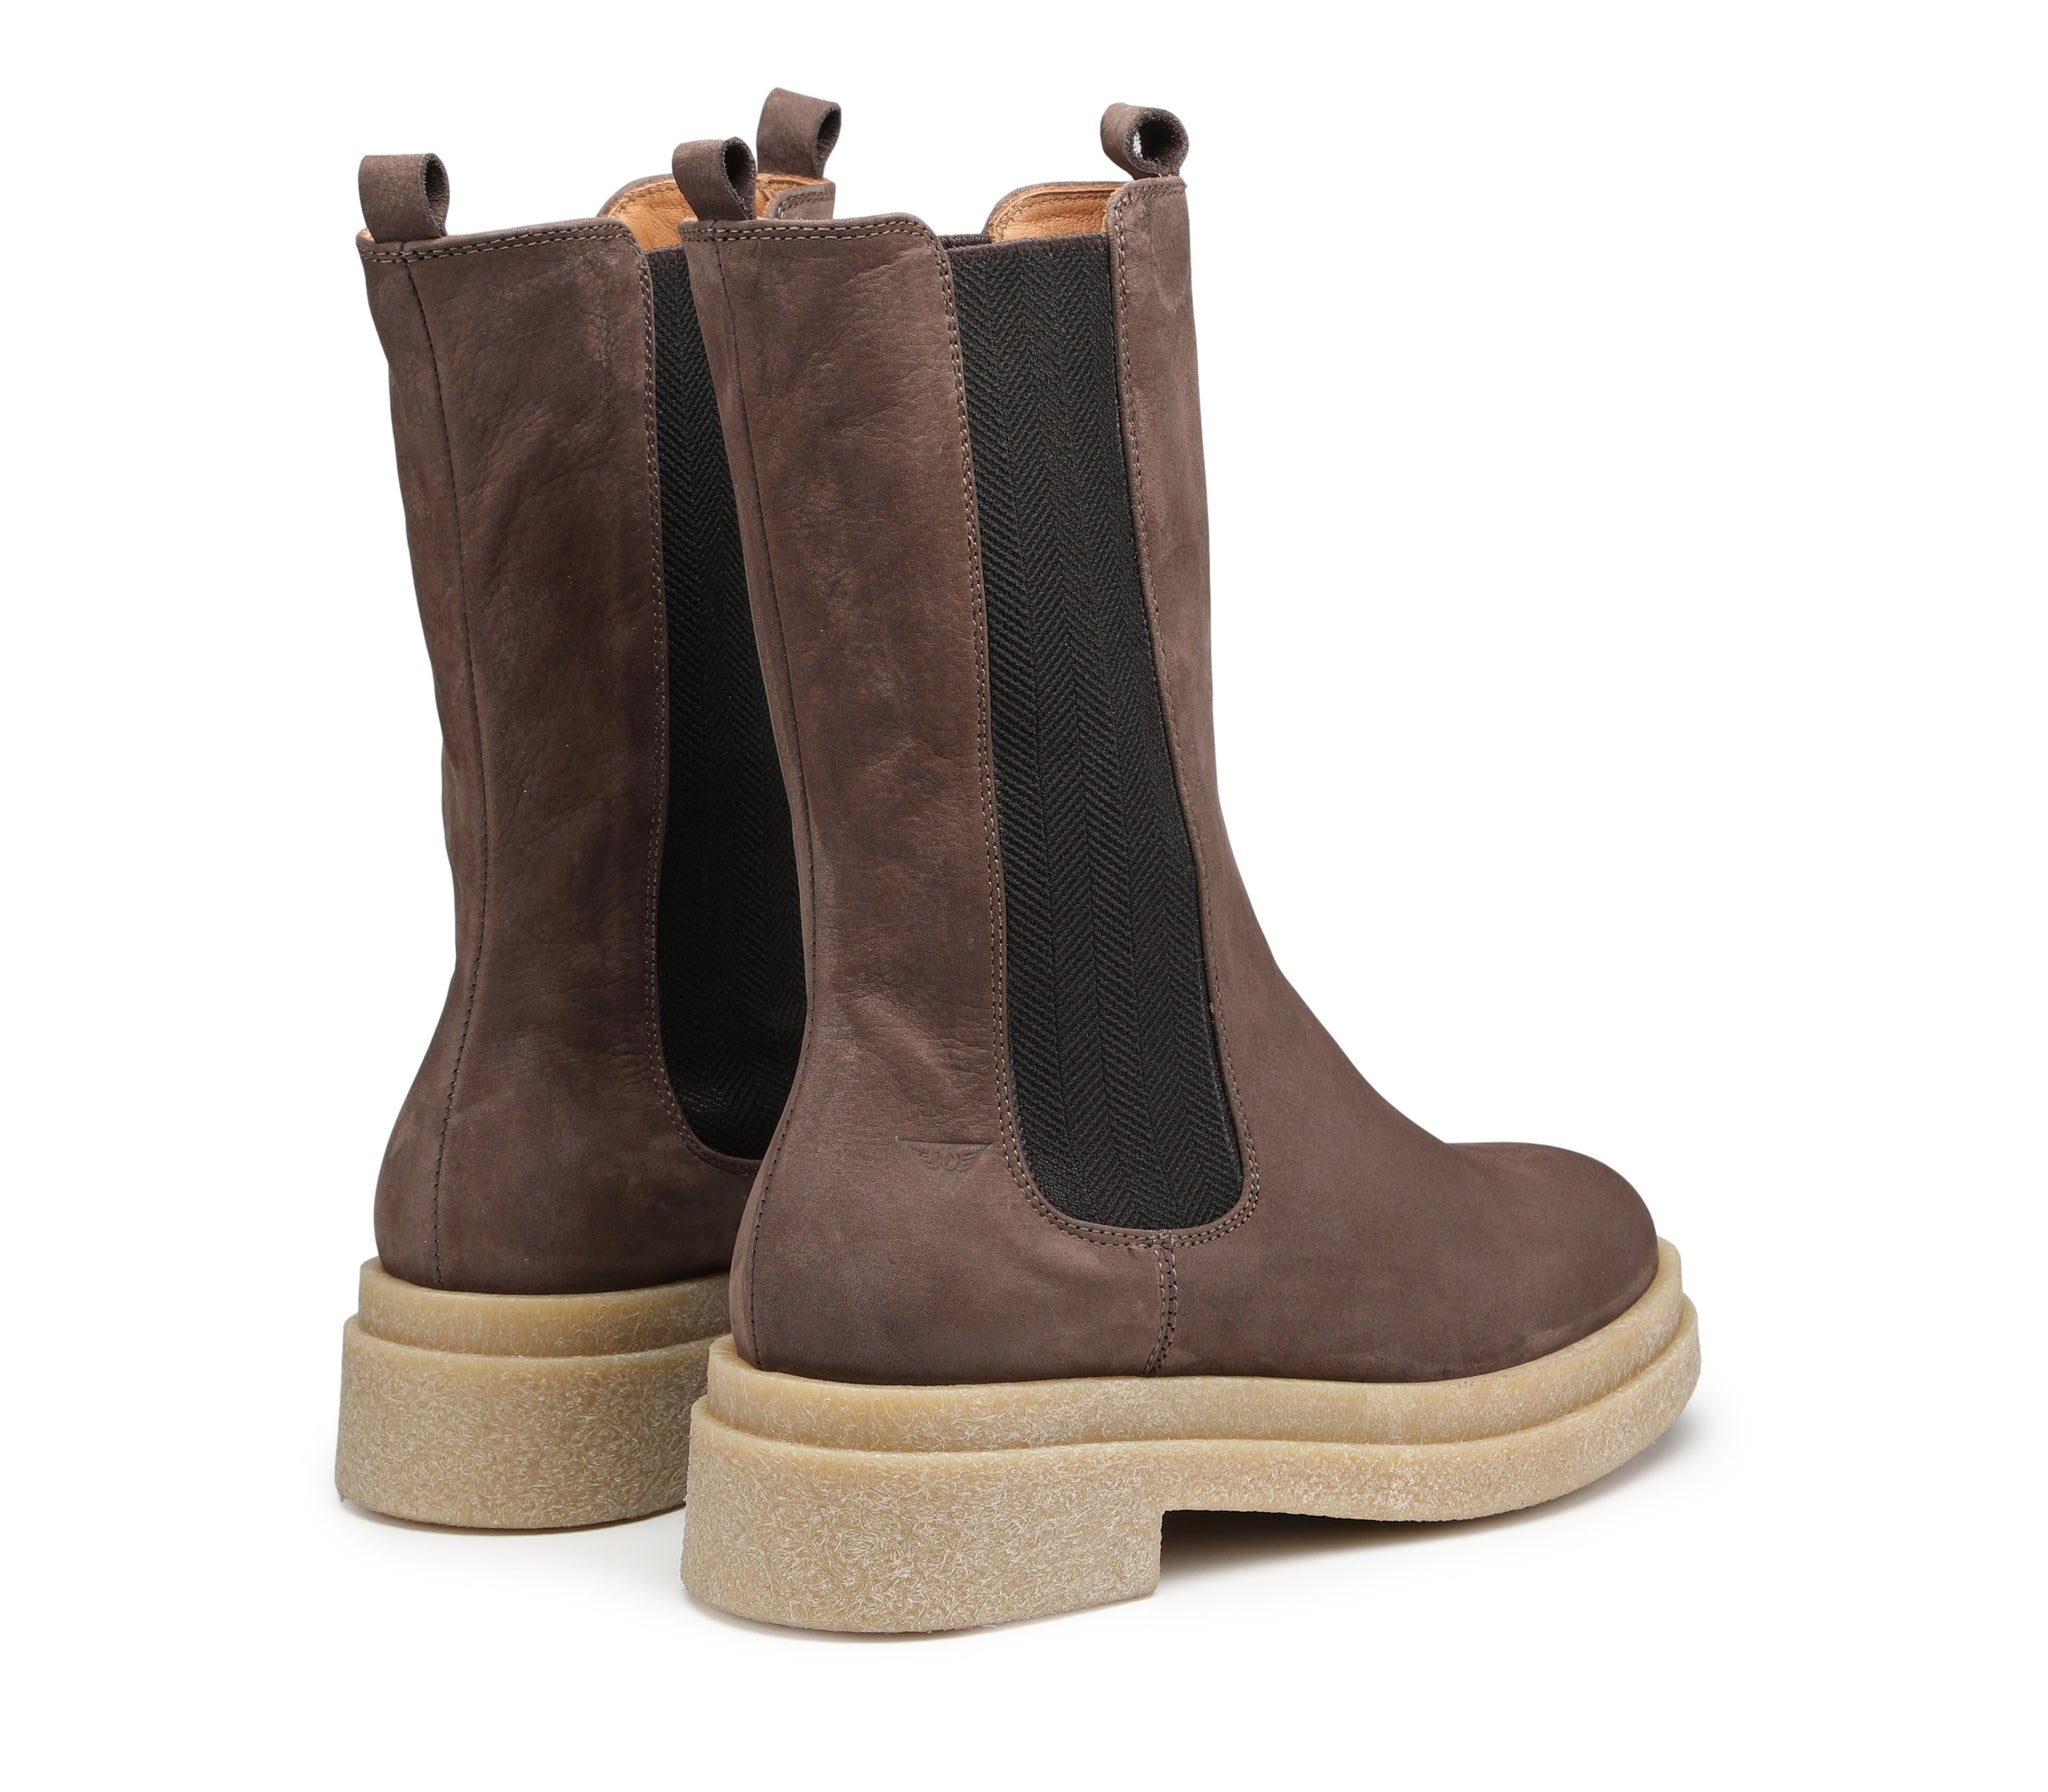 Women's Nubuck Boots with Side Elastics and Rubber Sole